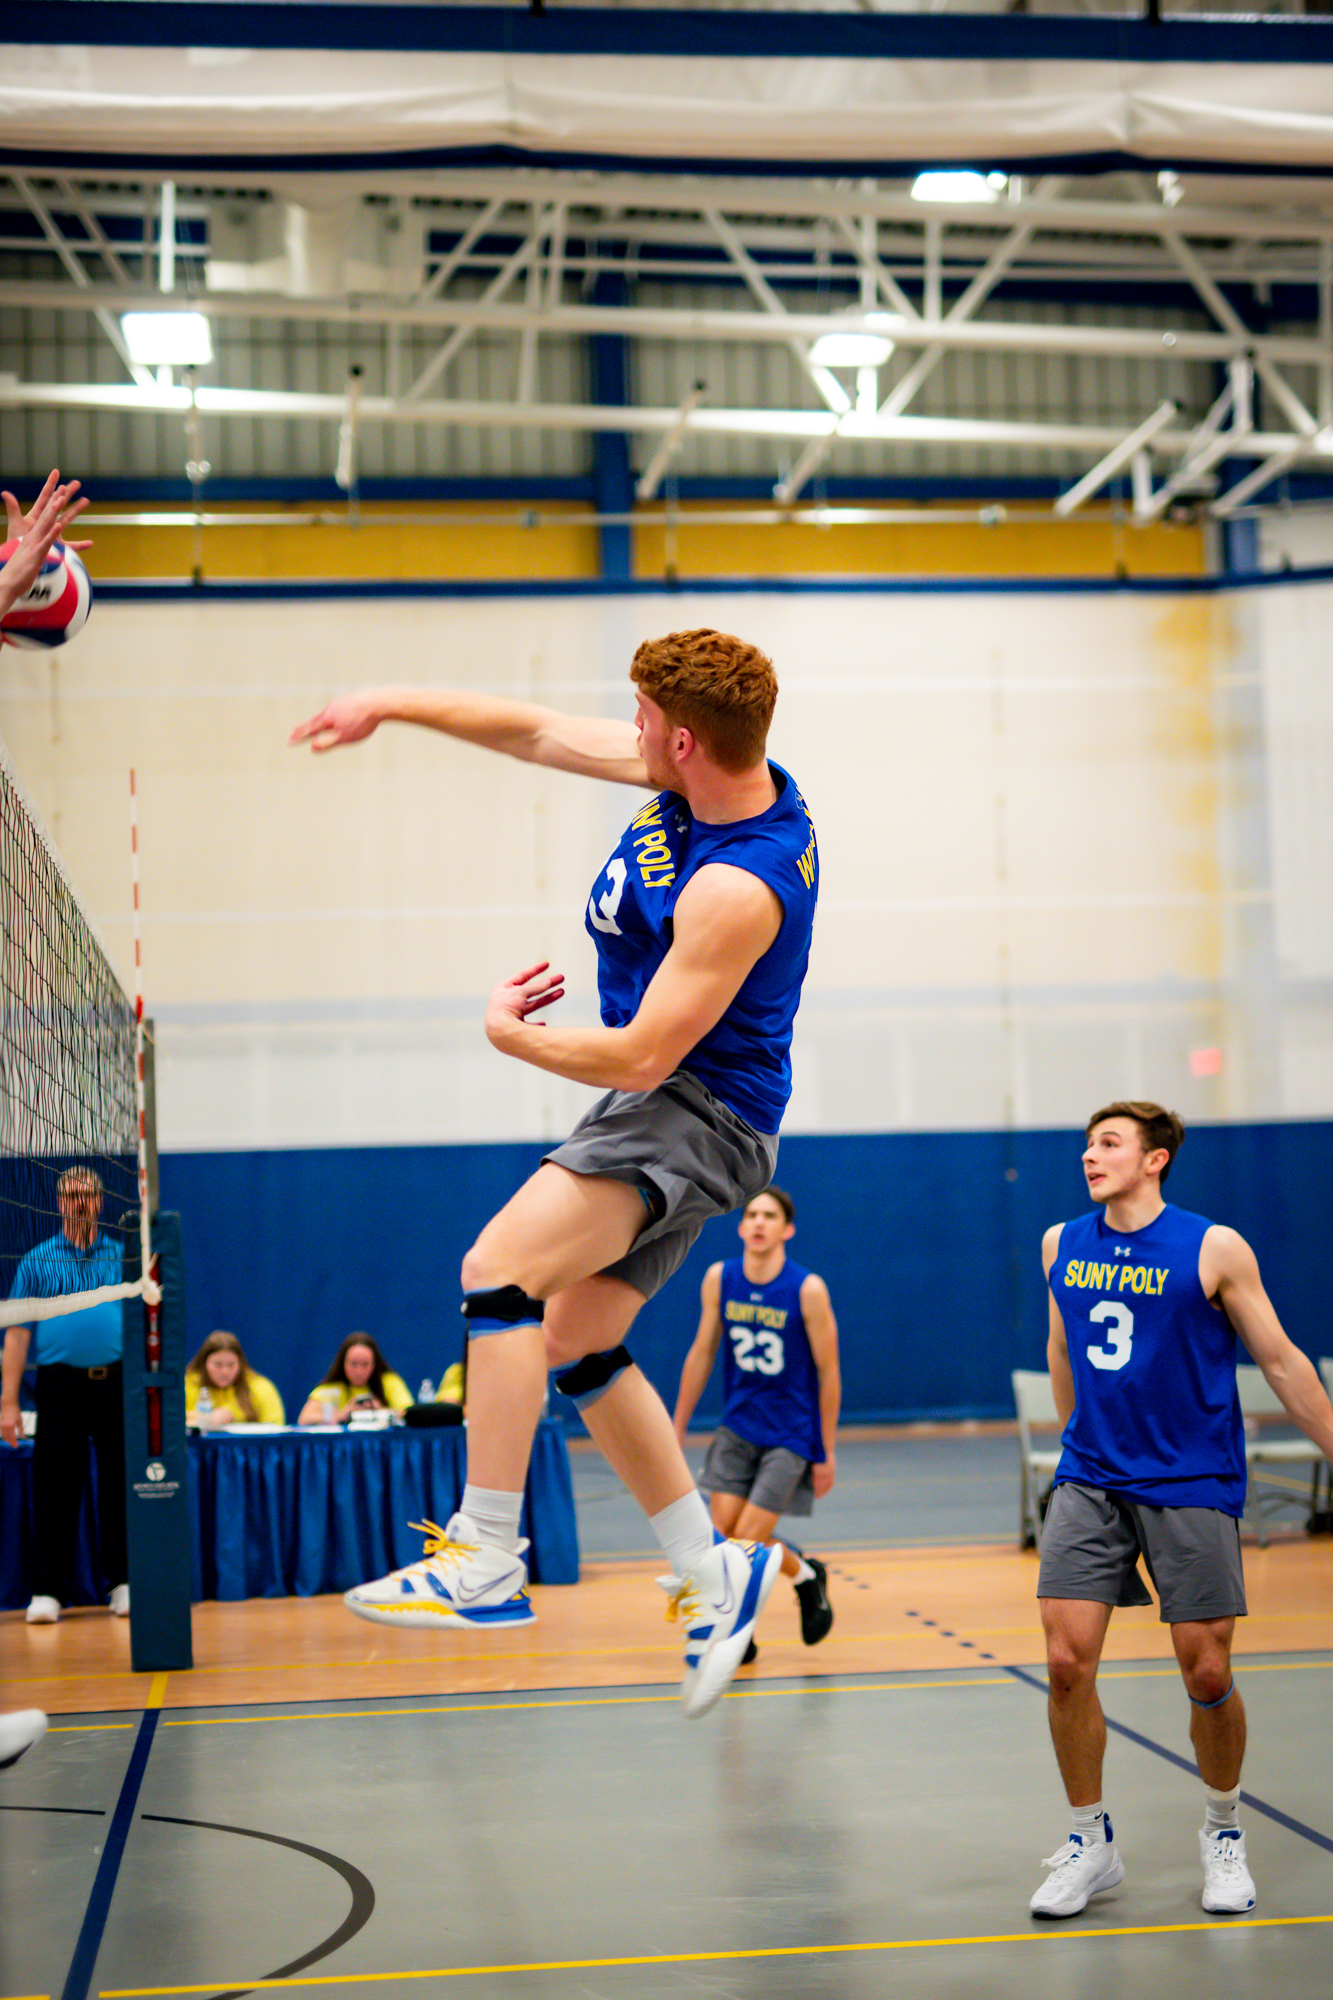 MVB: Wildcats Win First Match of the Season Against Russell Sage 3-0.